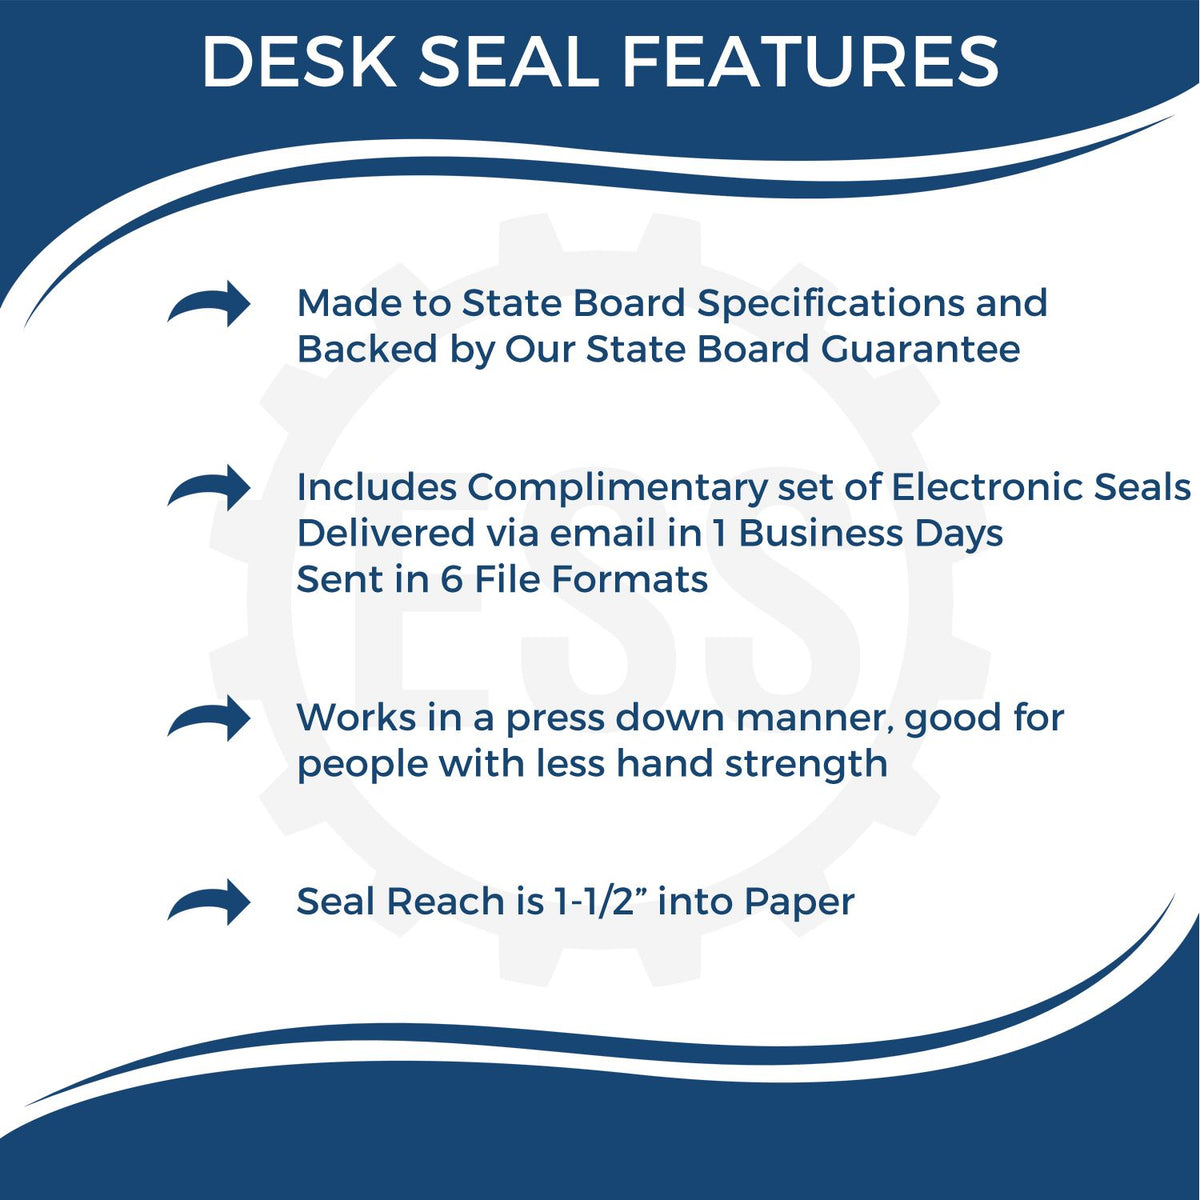 A picture of an infographic highlighting the selling points for the Arkansas Desk Surveyor Seal Embosser